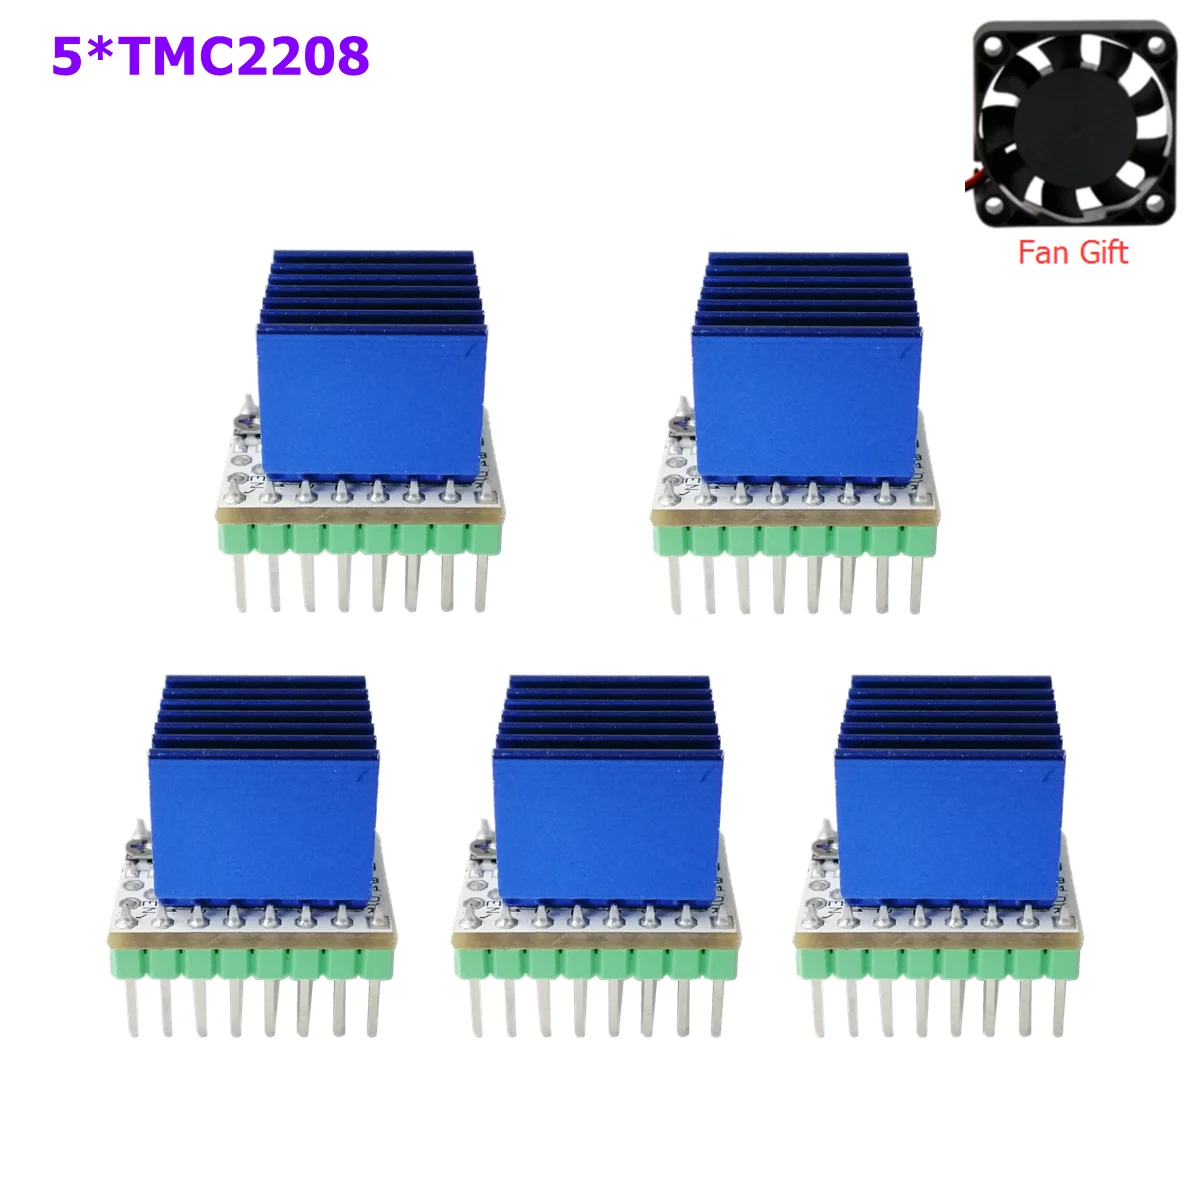 5x Stepper Motor Driver TMC2208 For 3D Printer Motherboard Packed with Heat Sink 